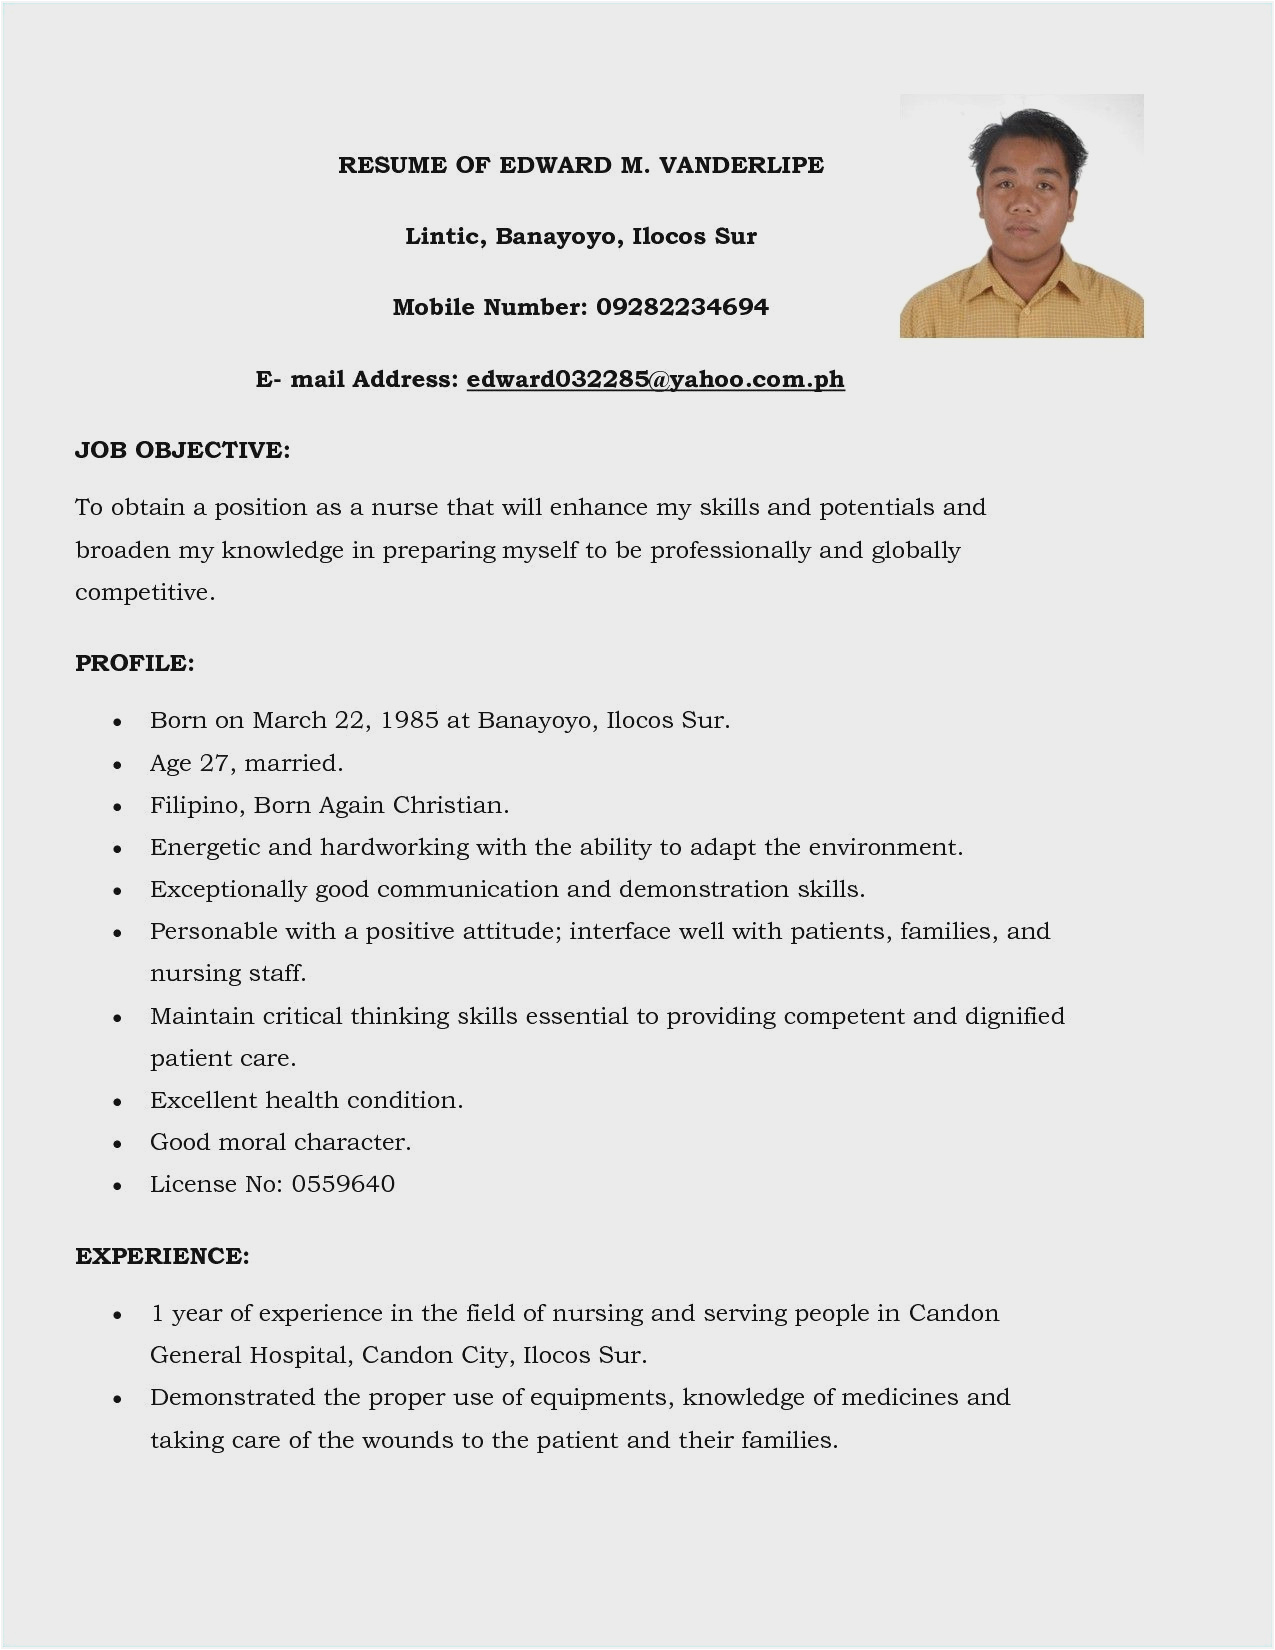 Sample Resume format for Nurses In the Philippines Resume with Picture Philippines